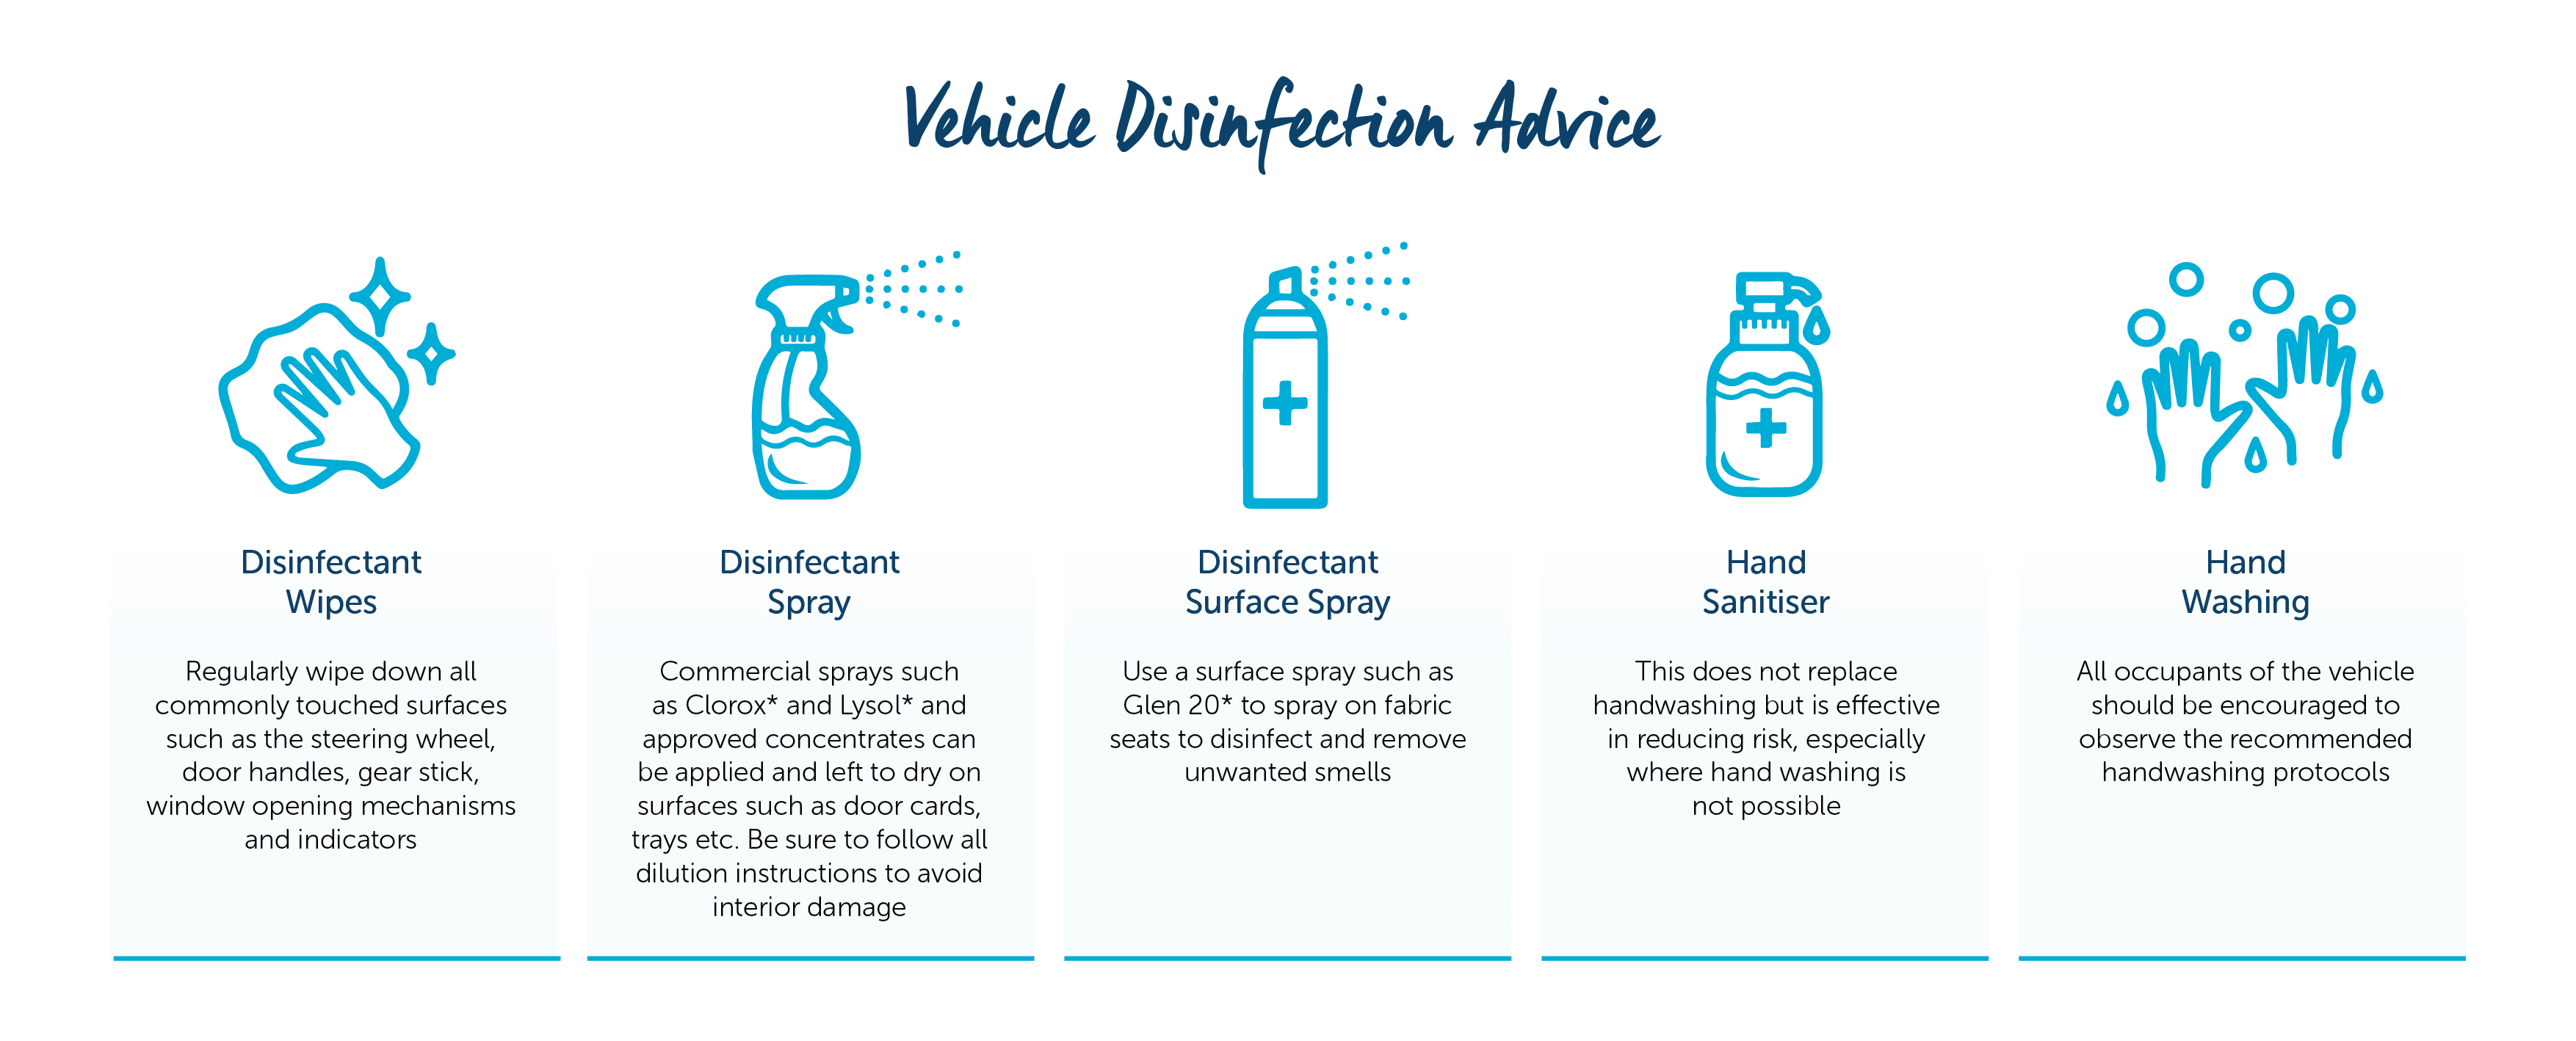 five tips for the vehicle disinfection that are disinfectant wipes. disinfectant spray, disinfectant surface spray, hand sanitizer and hand washing 